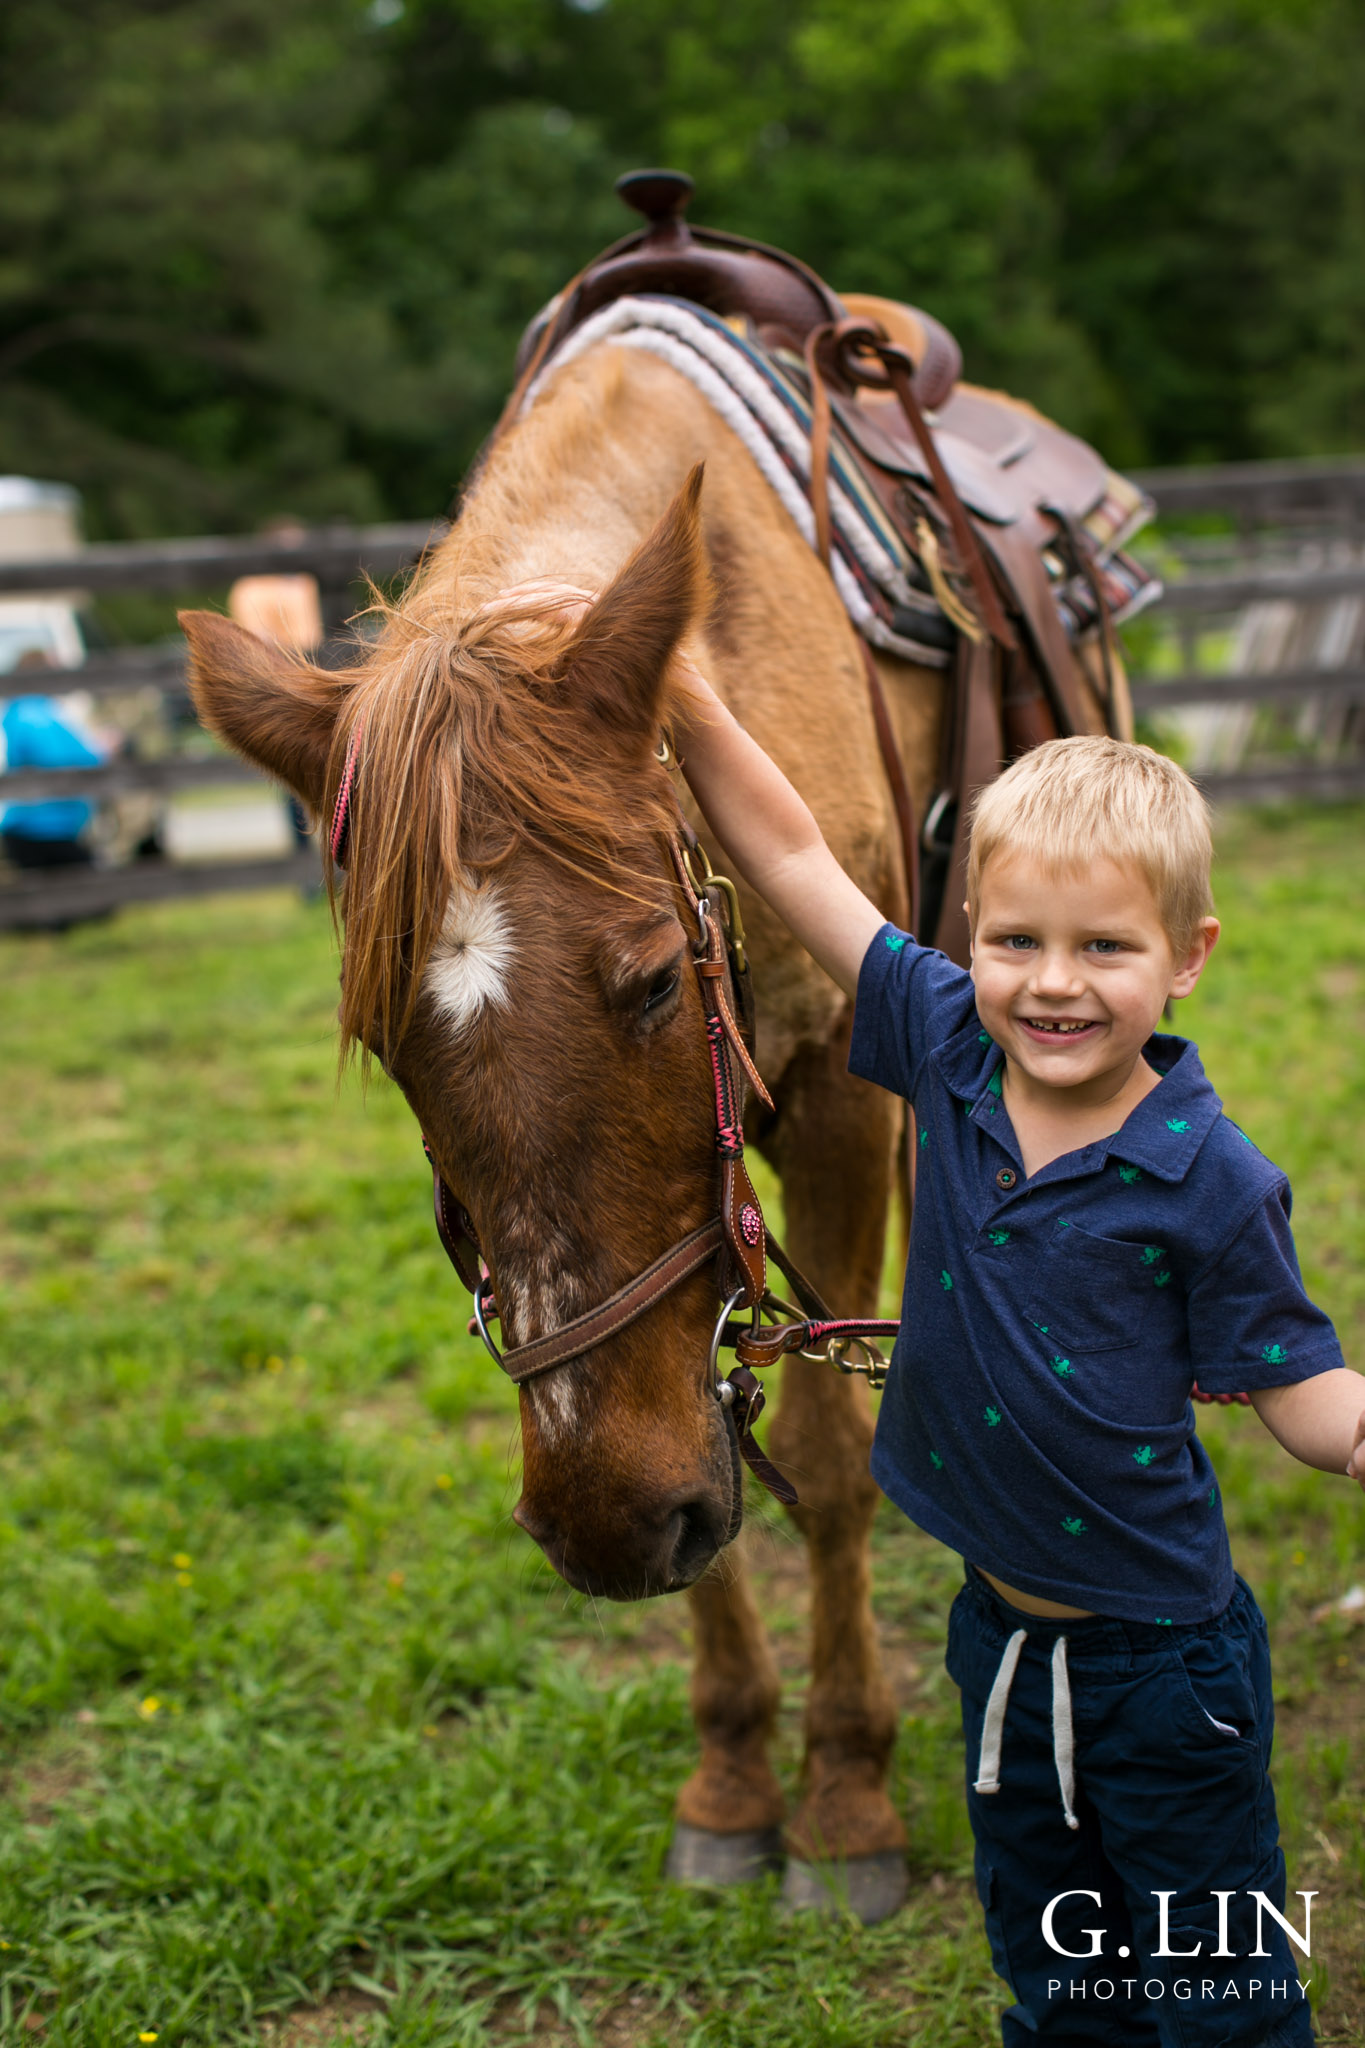 G. Lin Photography | Raleigh Event Photographer | Boy standing next to horse and smiling at camera